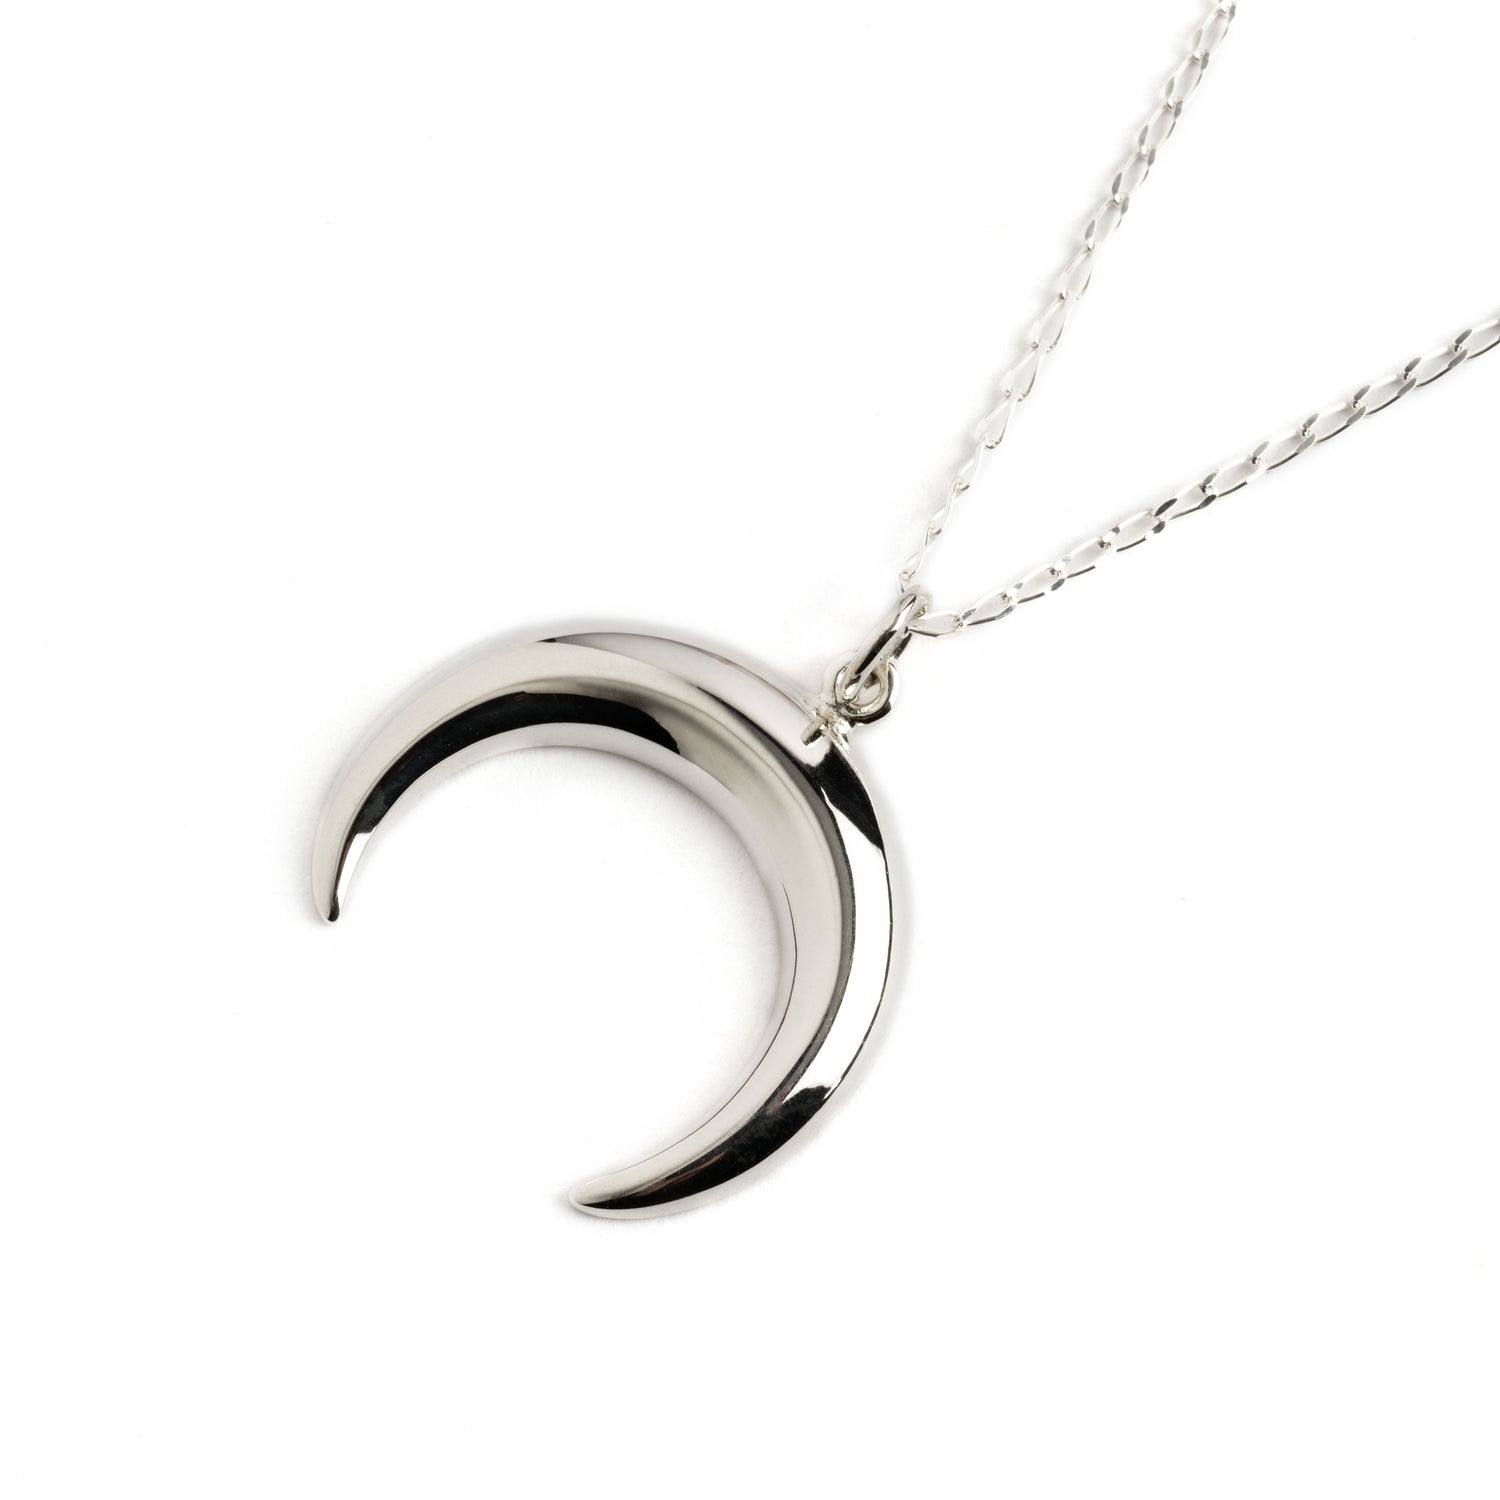 Silver crescent moon charm on a chain necklace right side view